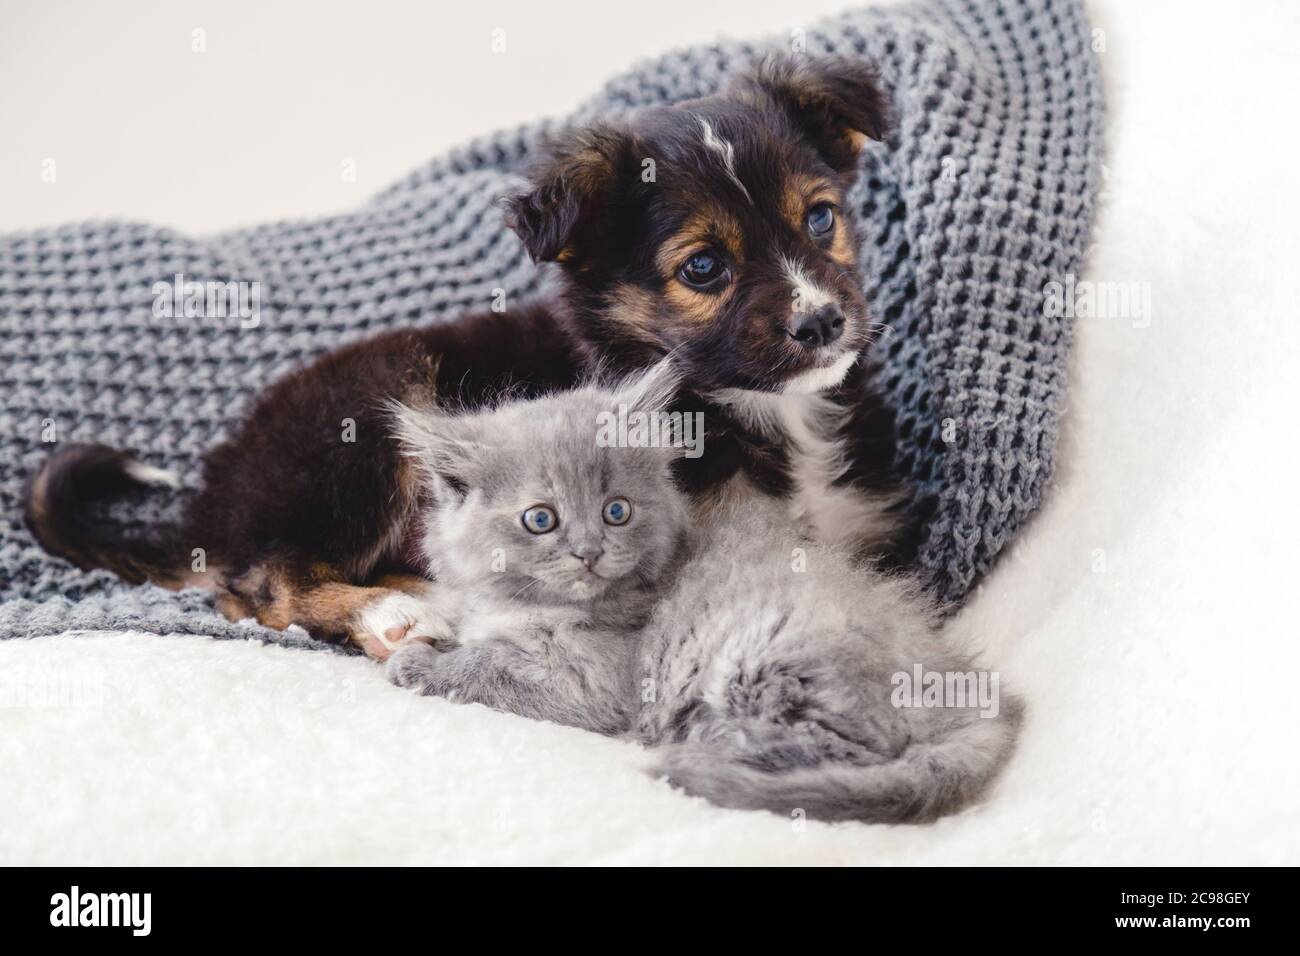 Kitten and puppy. Group of two small animals lie together on bed. Sad gray kitten and black puppy on white blanket alone at home. Cat dog friends Stock Photo